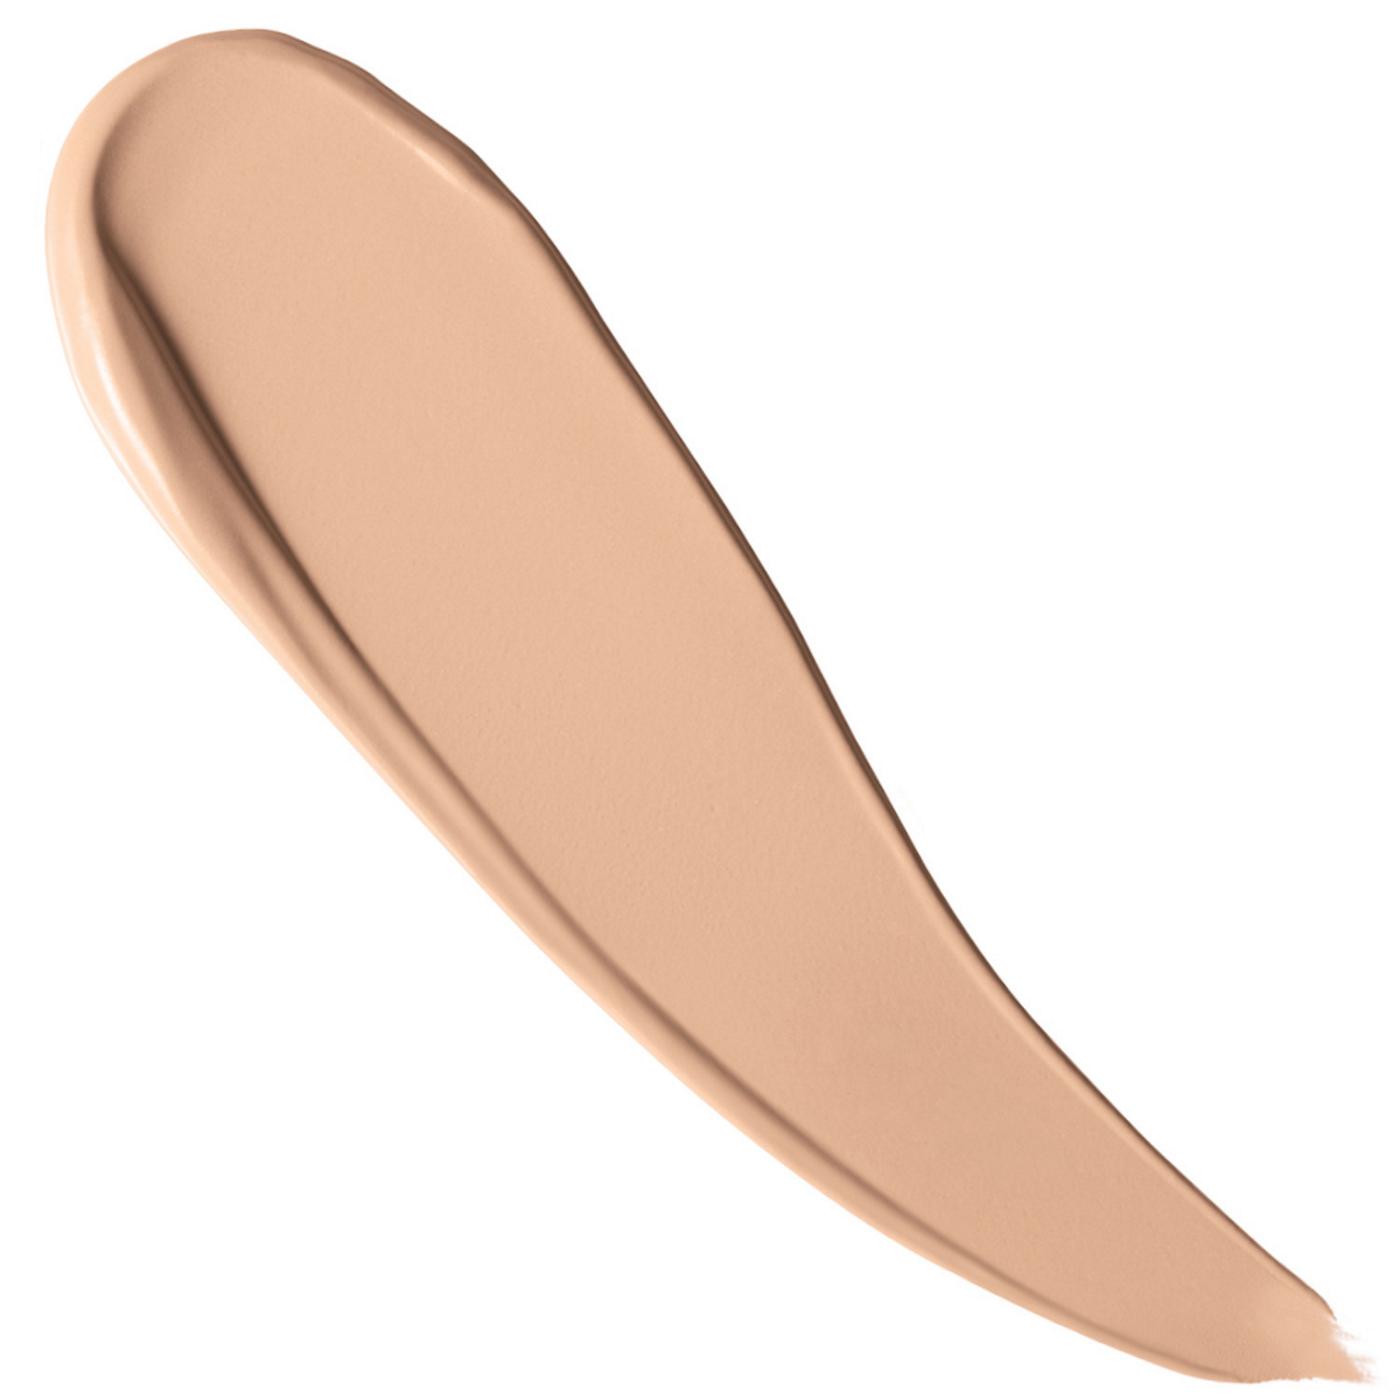 Covergirl Simply Ageless 3-in-1 Liquid Foundation 225 Buff Beige; image 5 of 6